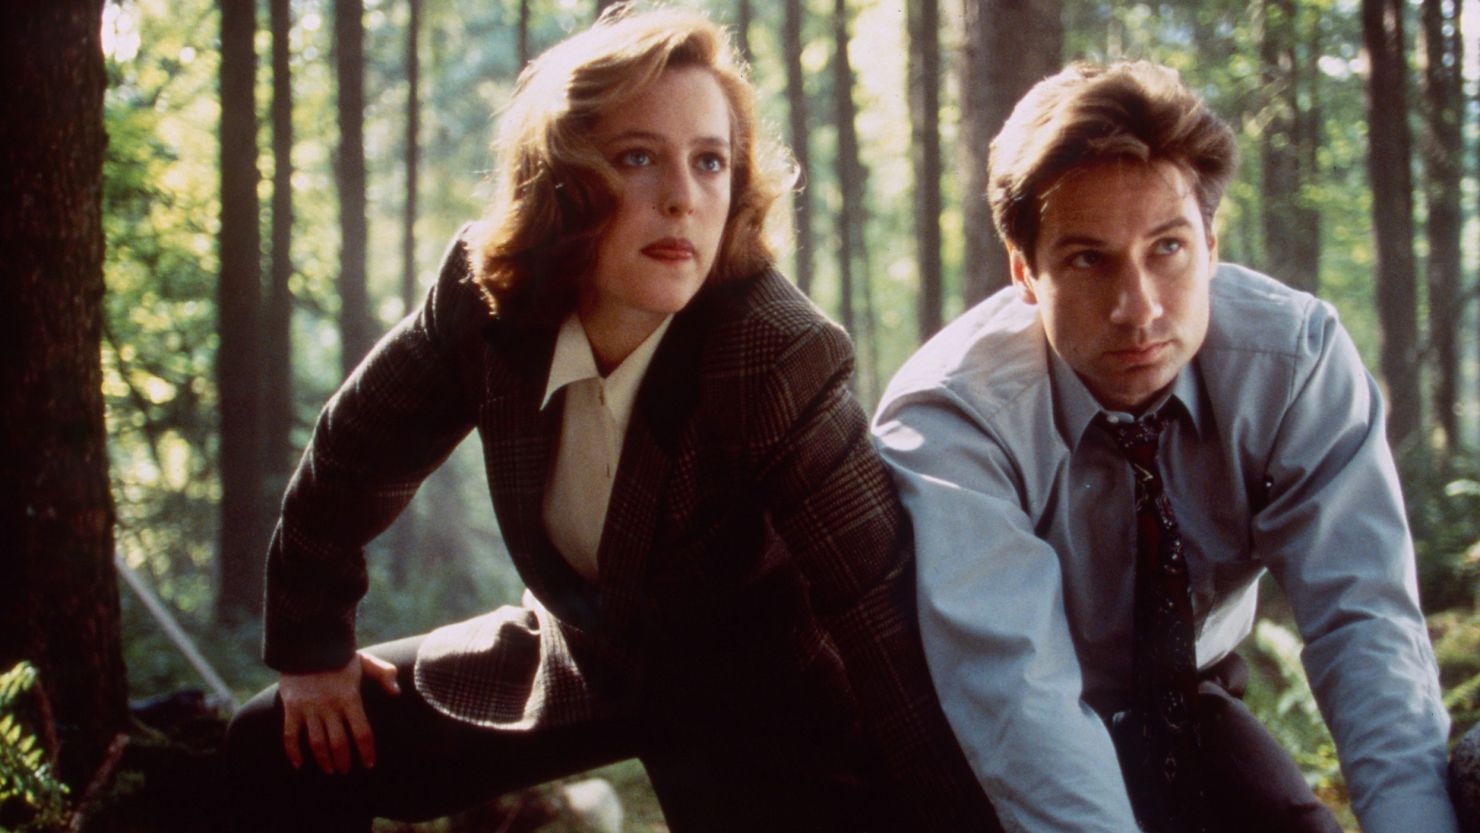 THE X-FILES, Gillian Anderson, David Duchovny, 1993-2002. photo: Chris H.B. / © Fox Network / Courtesy: Everett Collection